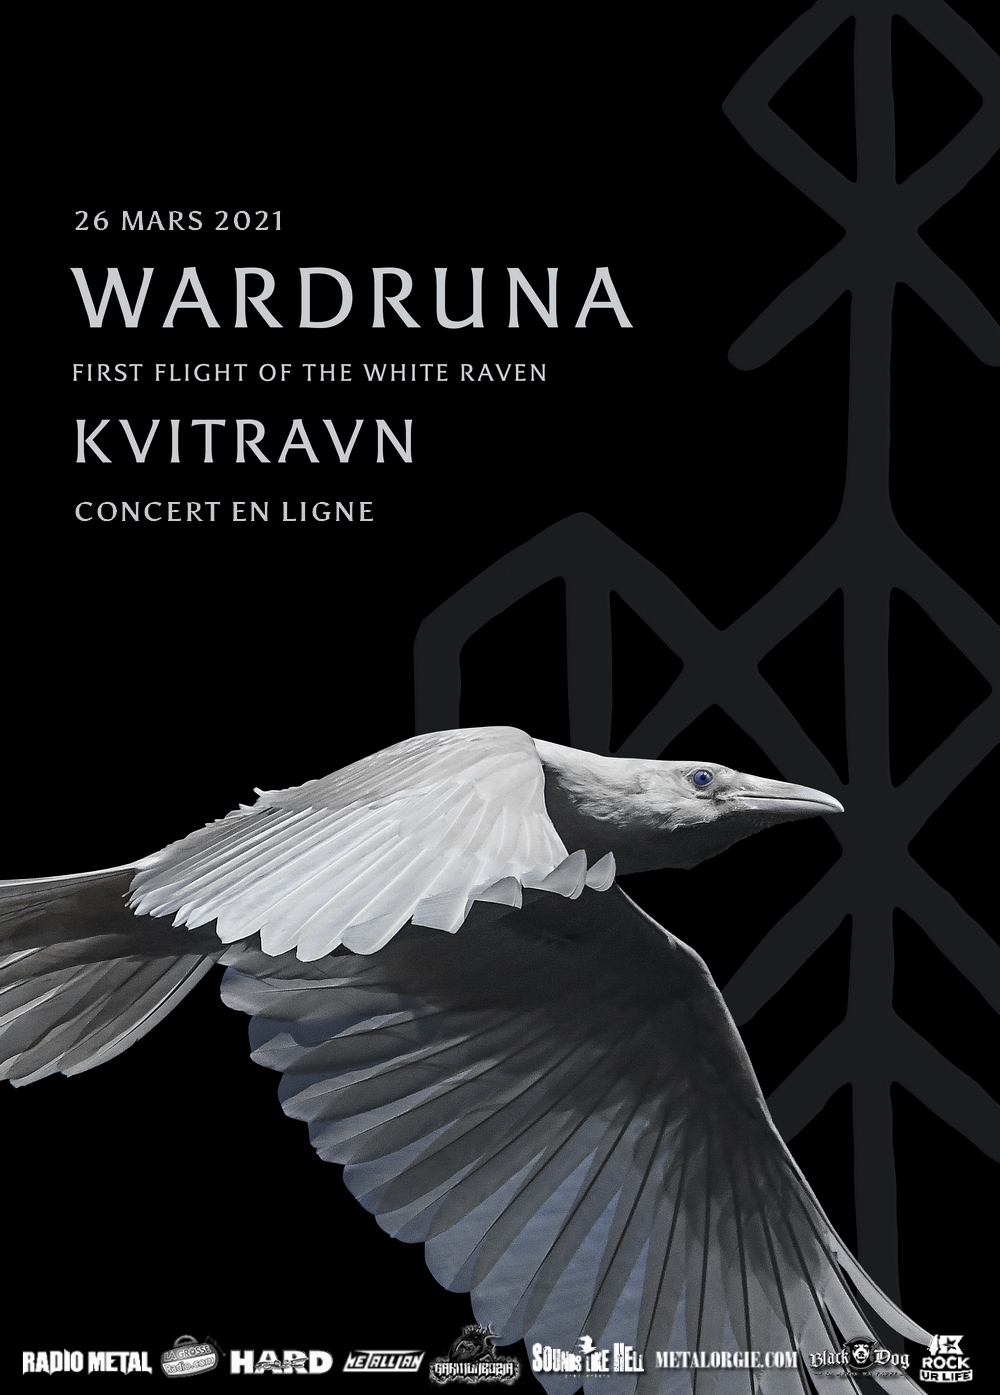 Annonce de concert : WARDRUNA “First Flight of the White Raven” post thumbnail image